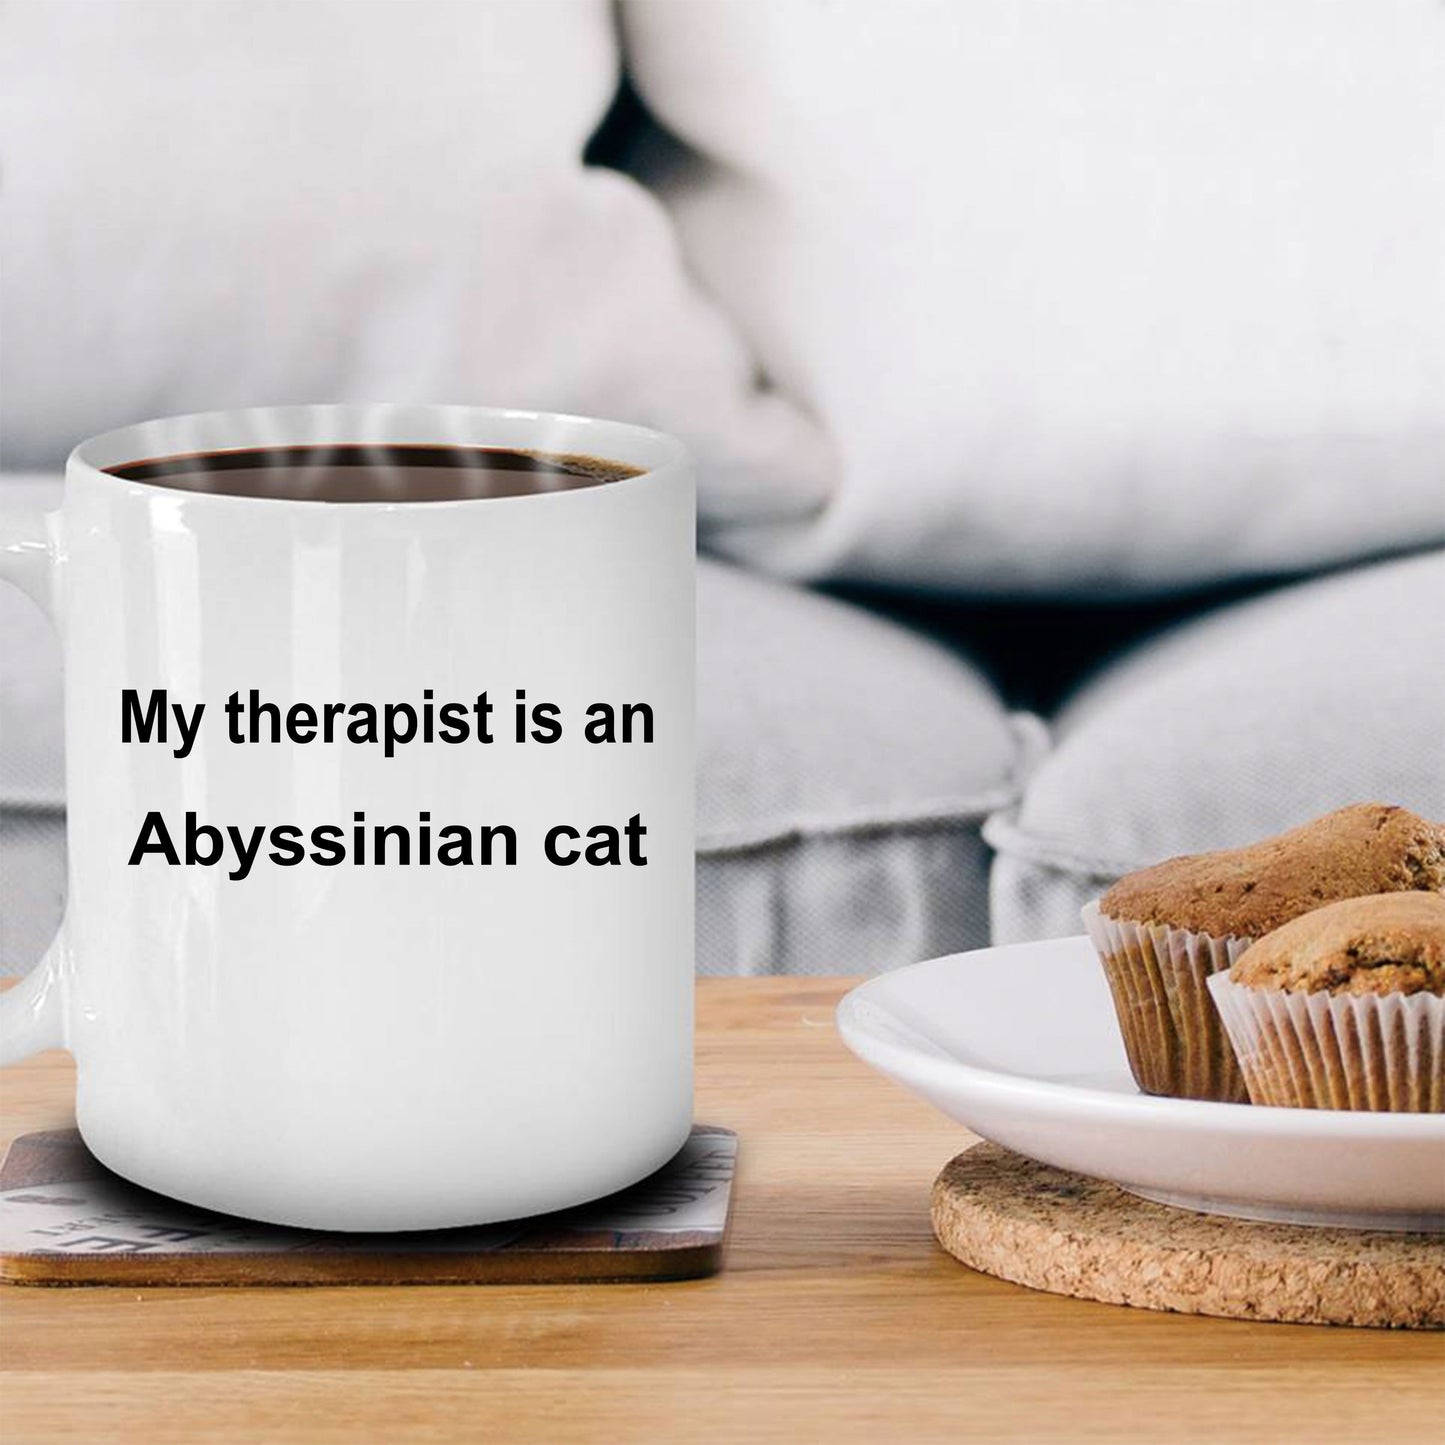 Abyssinian Cat Gift Funny Therapists Ceramic Coffee Mug